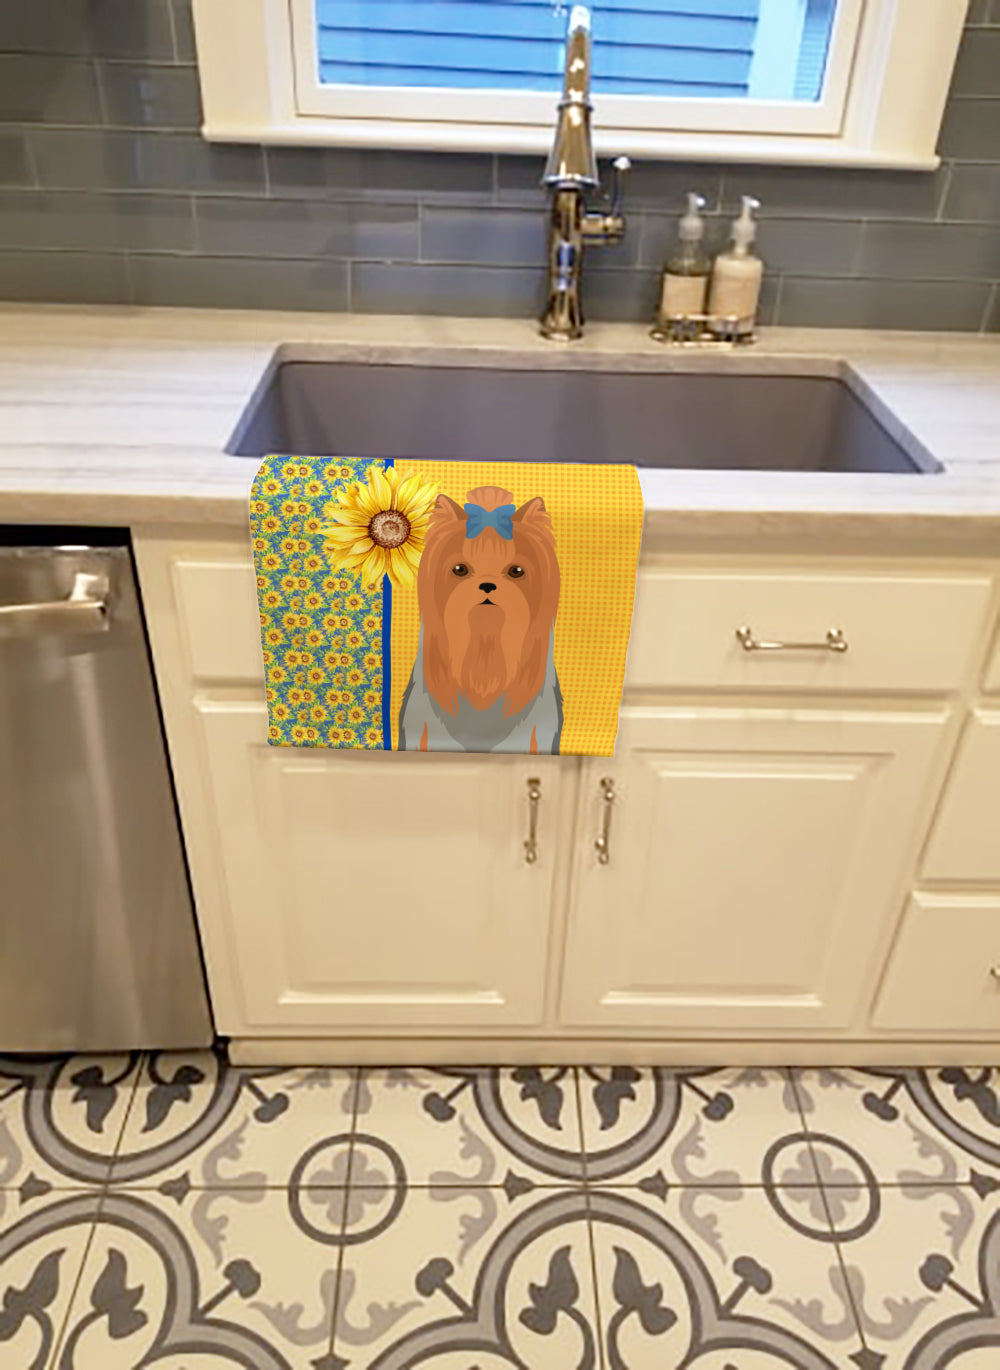 Buy this Summer Sunflowers Blue and Tan Full Coat Yorkshire Terrier Kitchen Towel